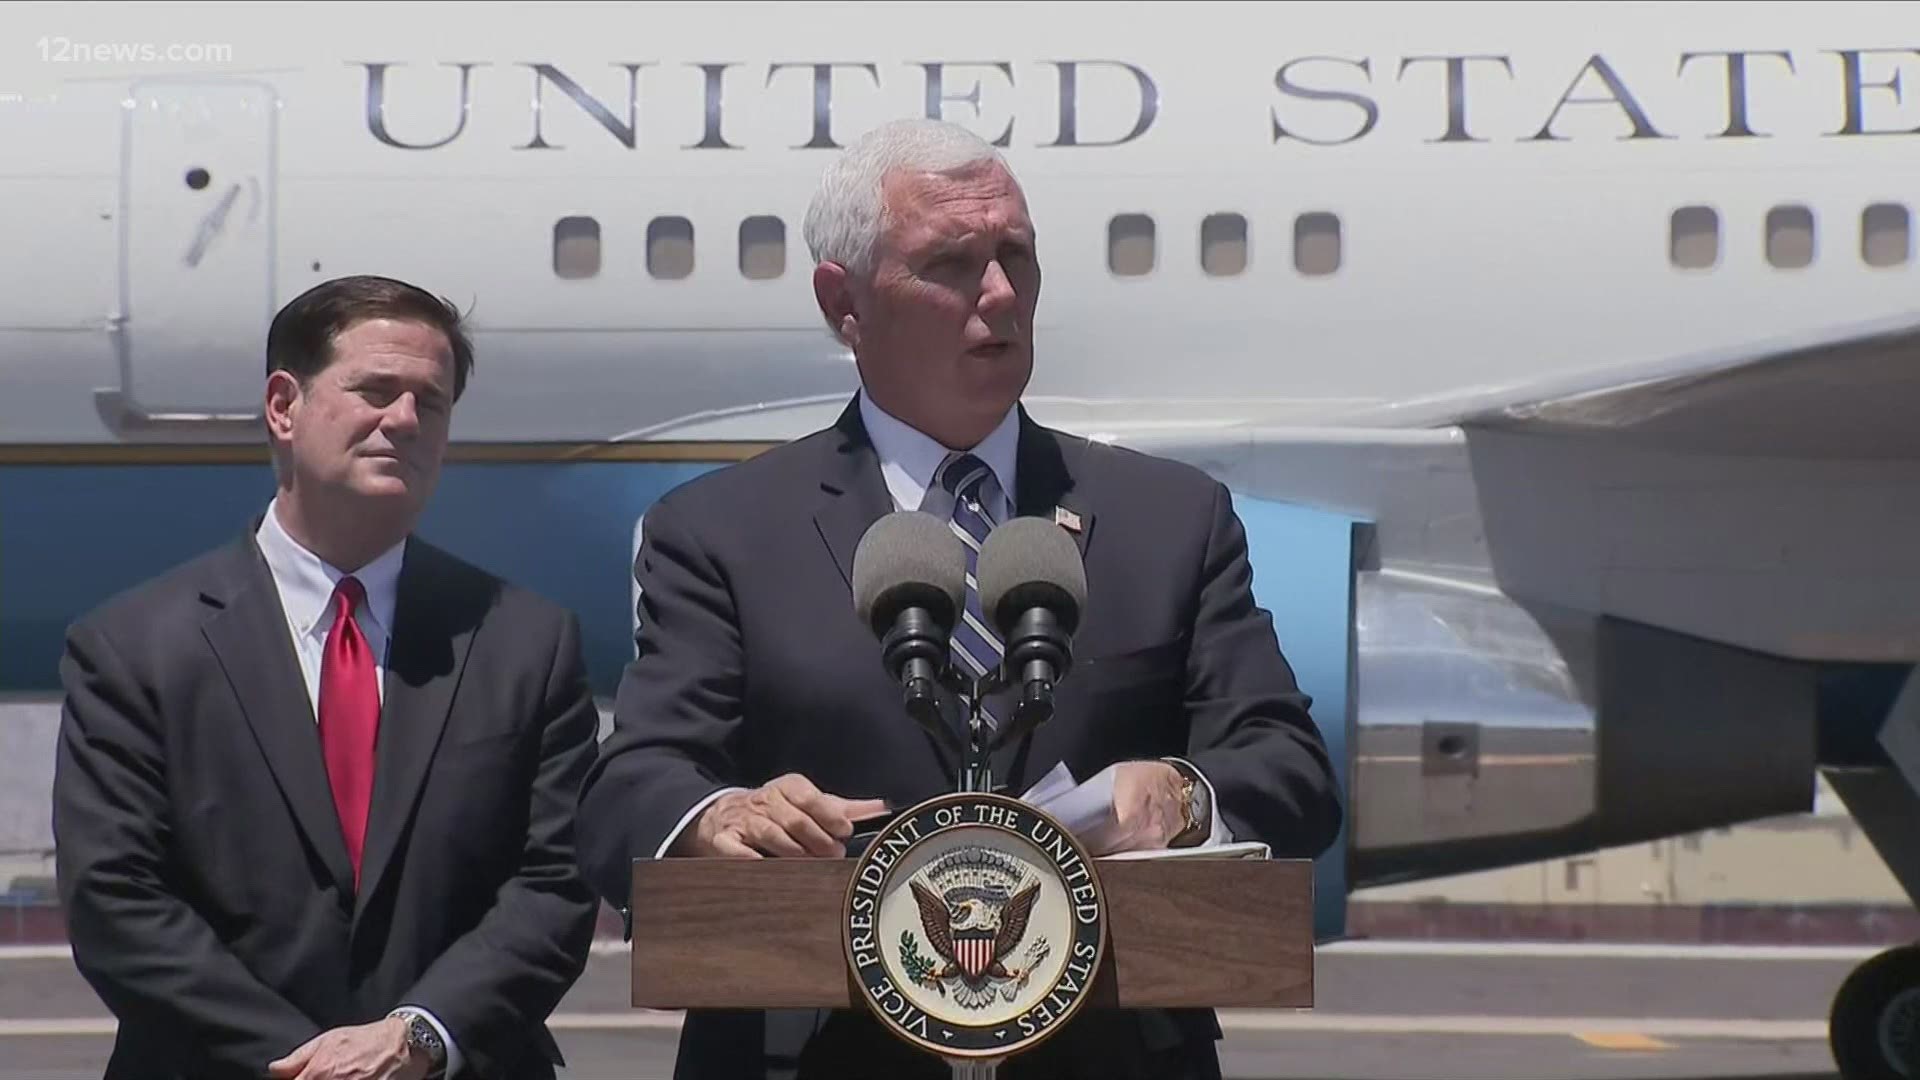 Amid Arizona's recent spike in COVID-19 cases Vice President Mike Pence came to Phoenix on Wednesday. He said help is on the way and praised Arizona's efforts.